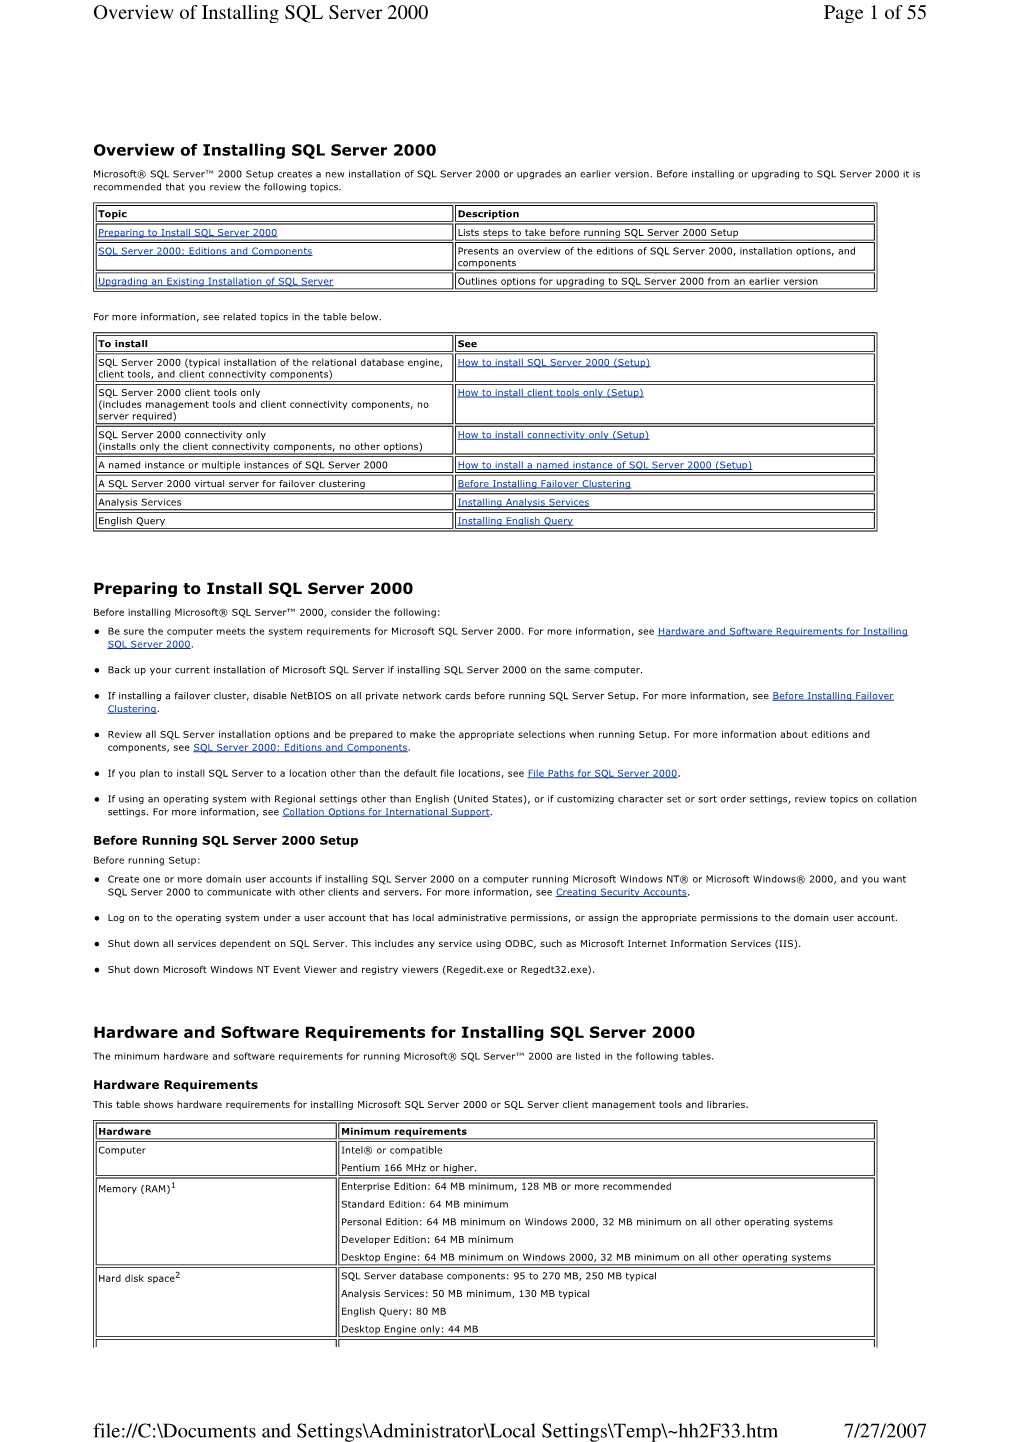 Page 1 of 55 Overview of Installing SQL Server 2000 7/27/2007 File://C